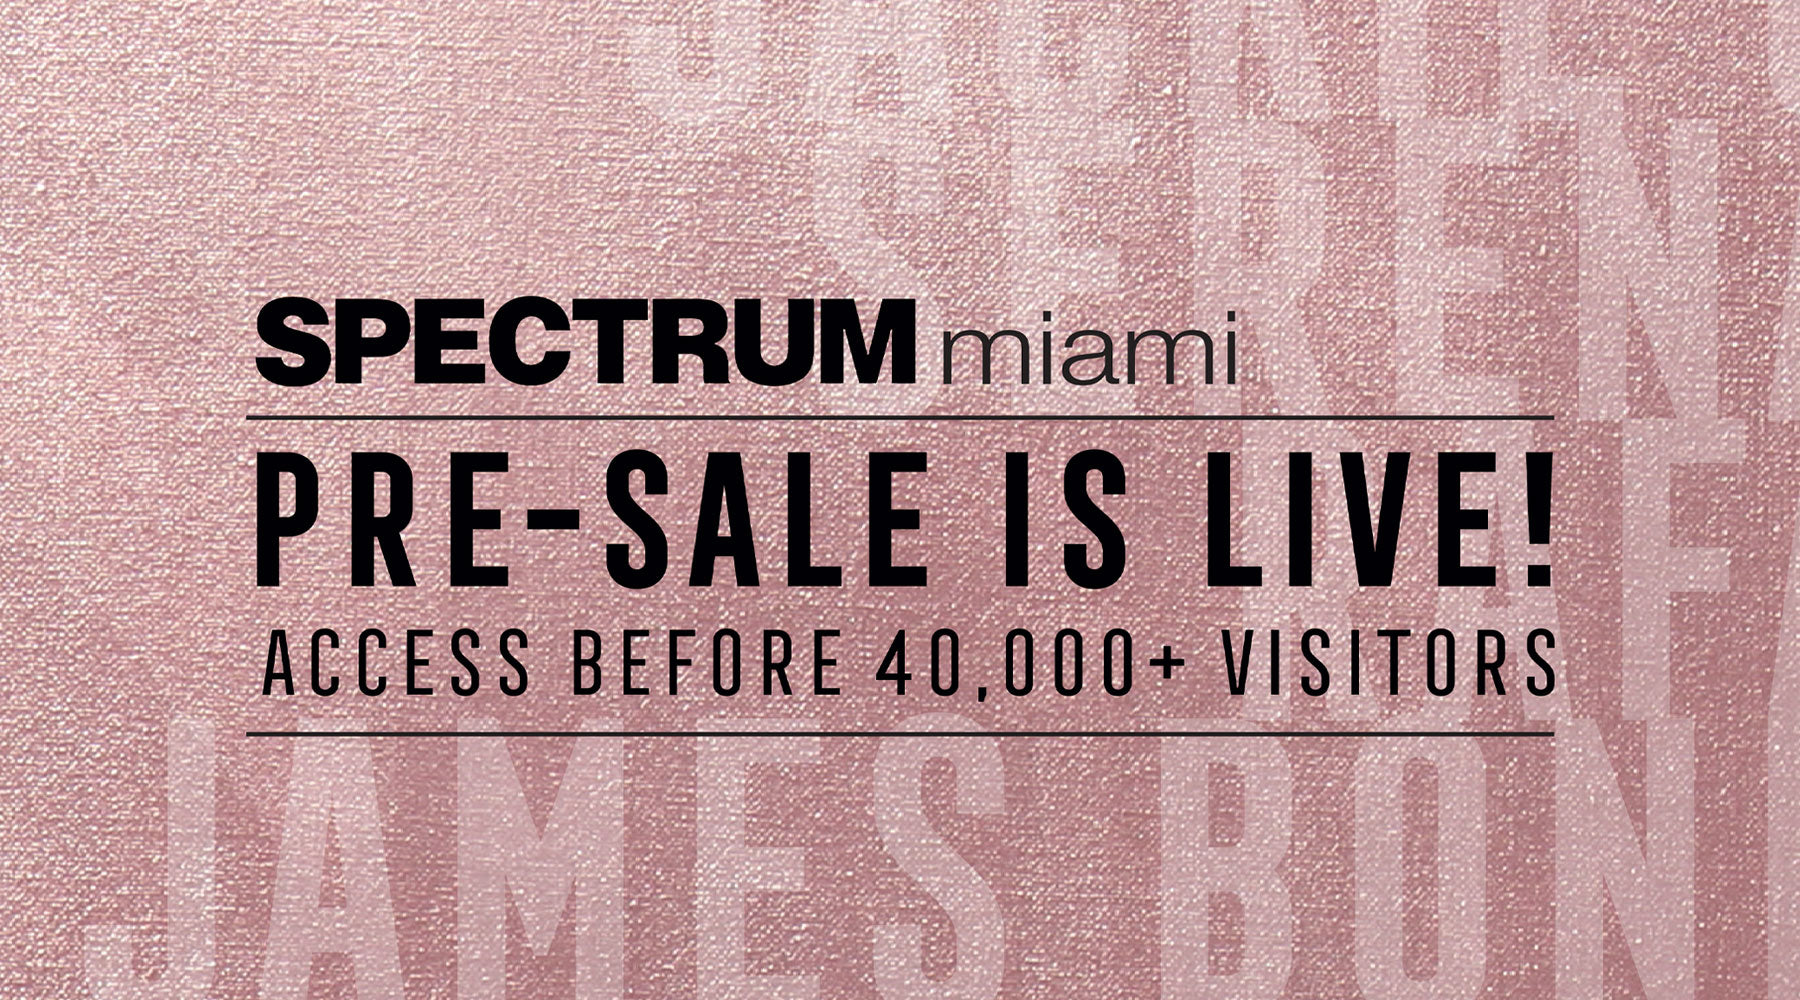 Pre-Sale is LIVE! Your chance to purchase before 40,000+ visitors